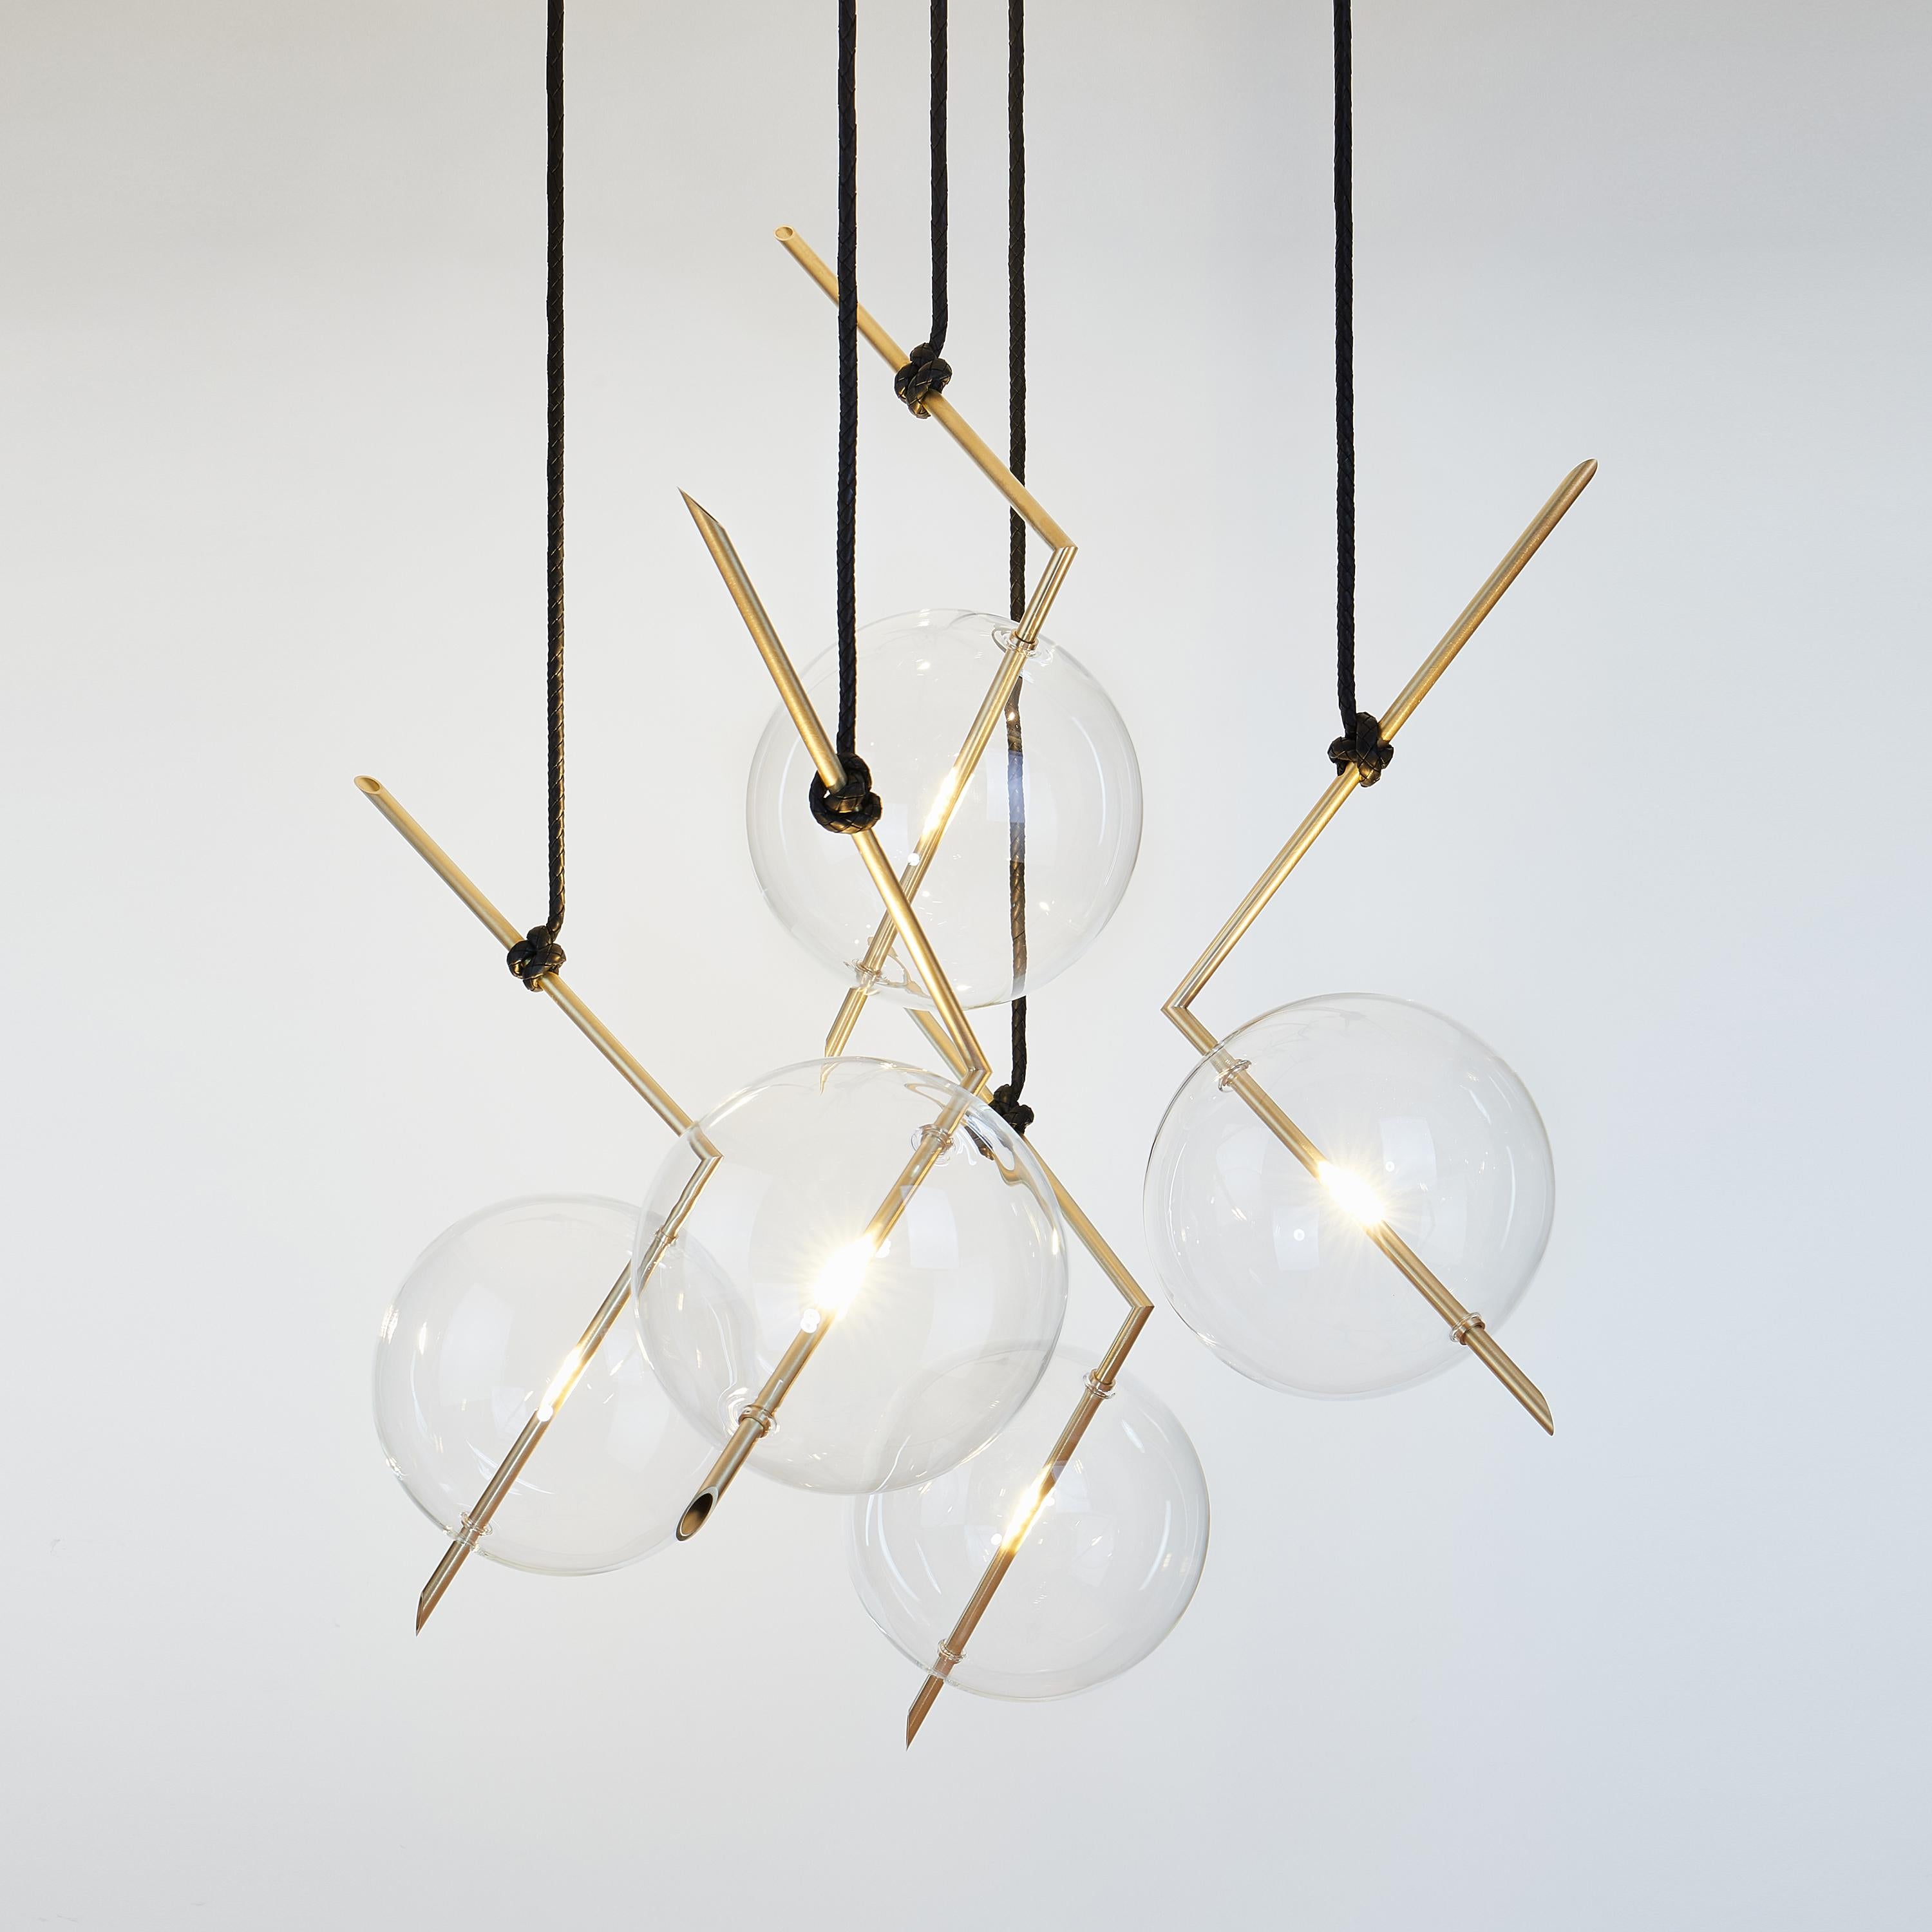 Nuvola five-light floats in space like a jewel hanging from the ceiling, hooked at the end of a leather cord that has been hand knotted around the brass tube; a perfect equilibrium of different materials, with obsessive attention to details.

The